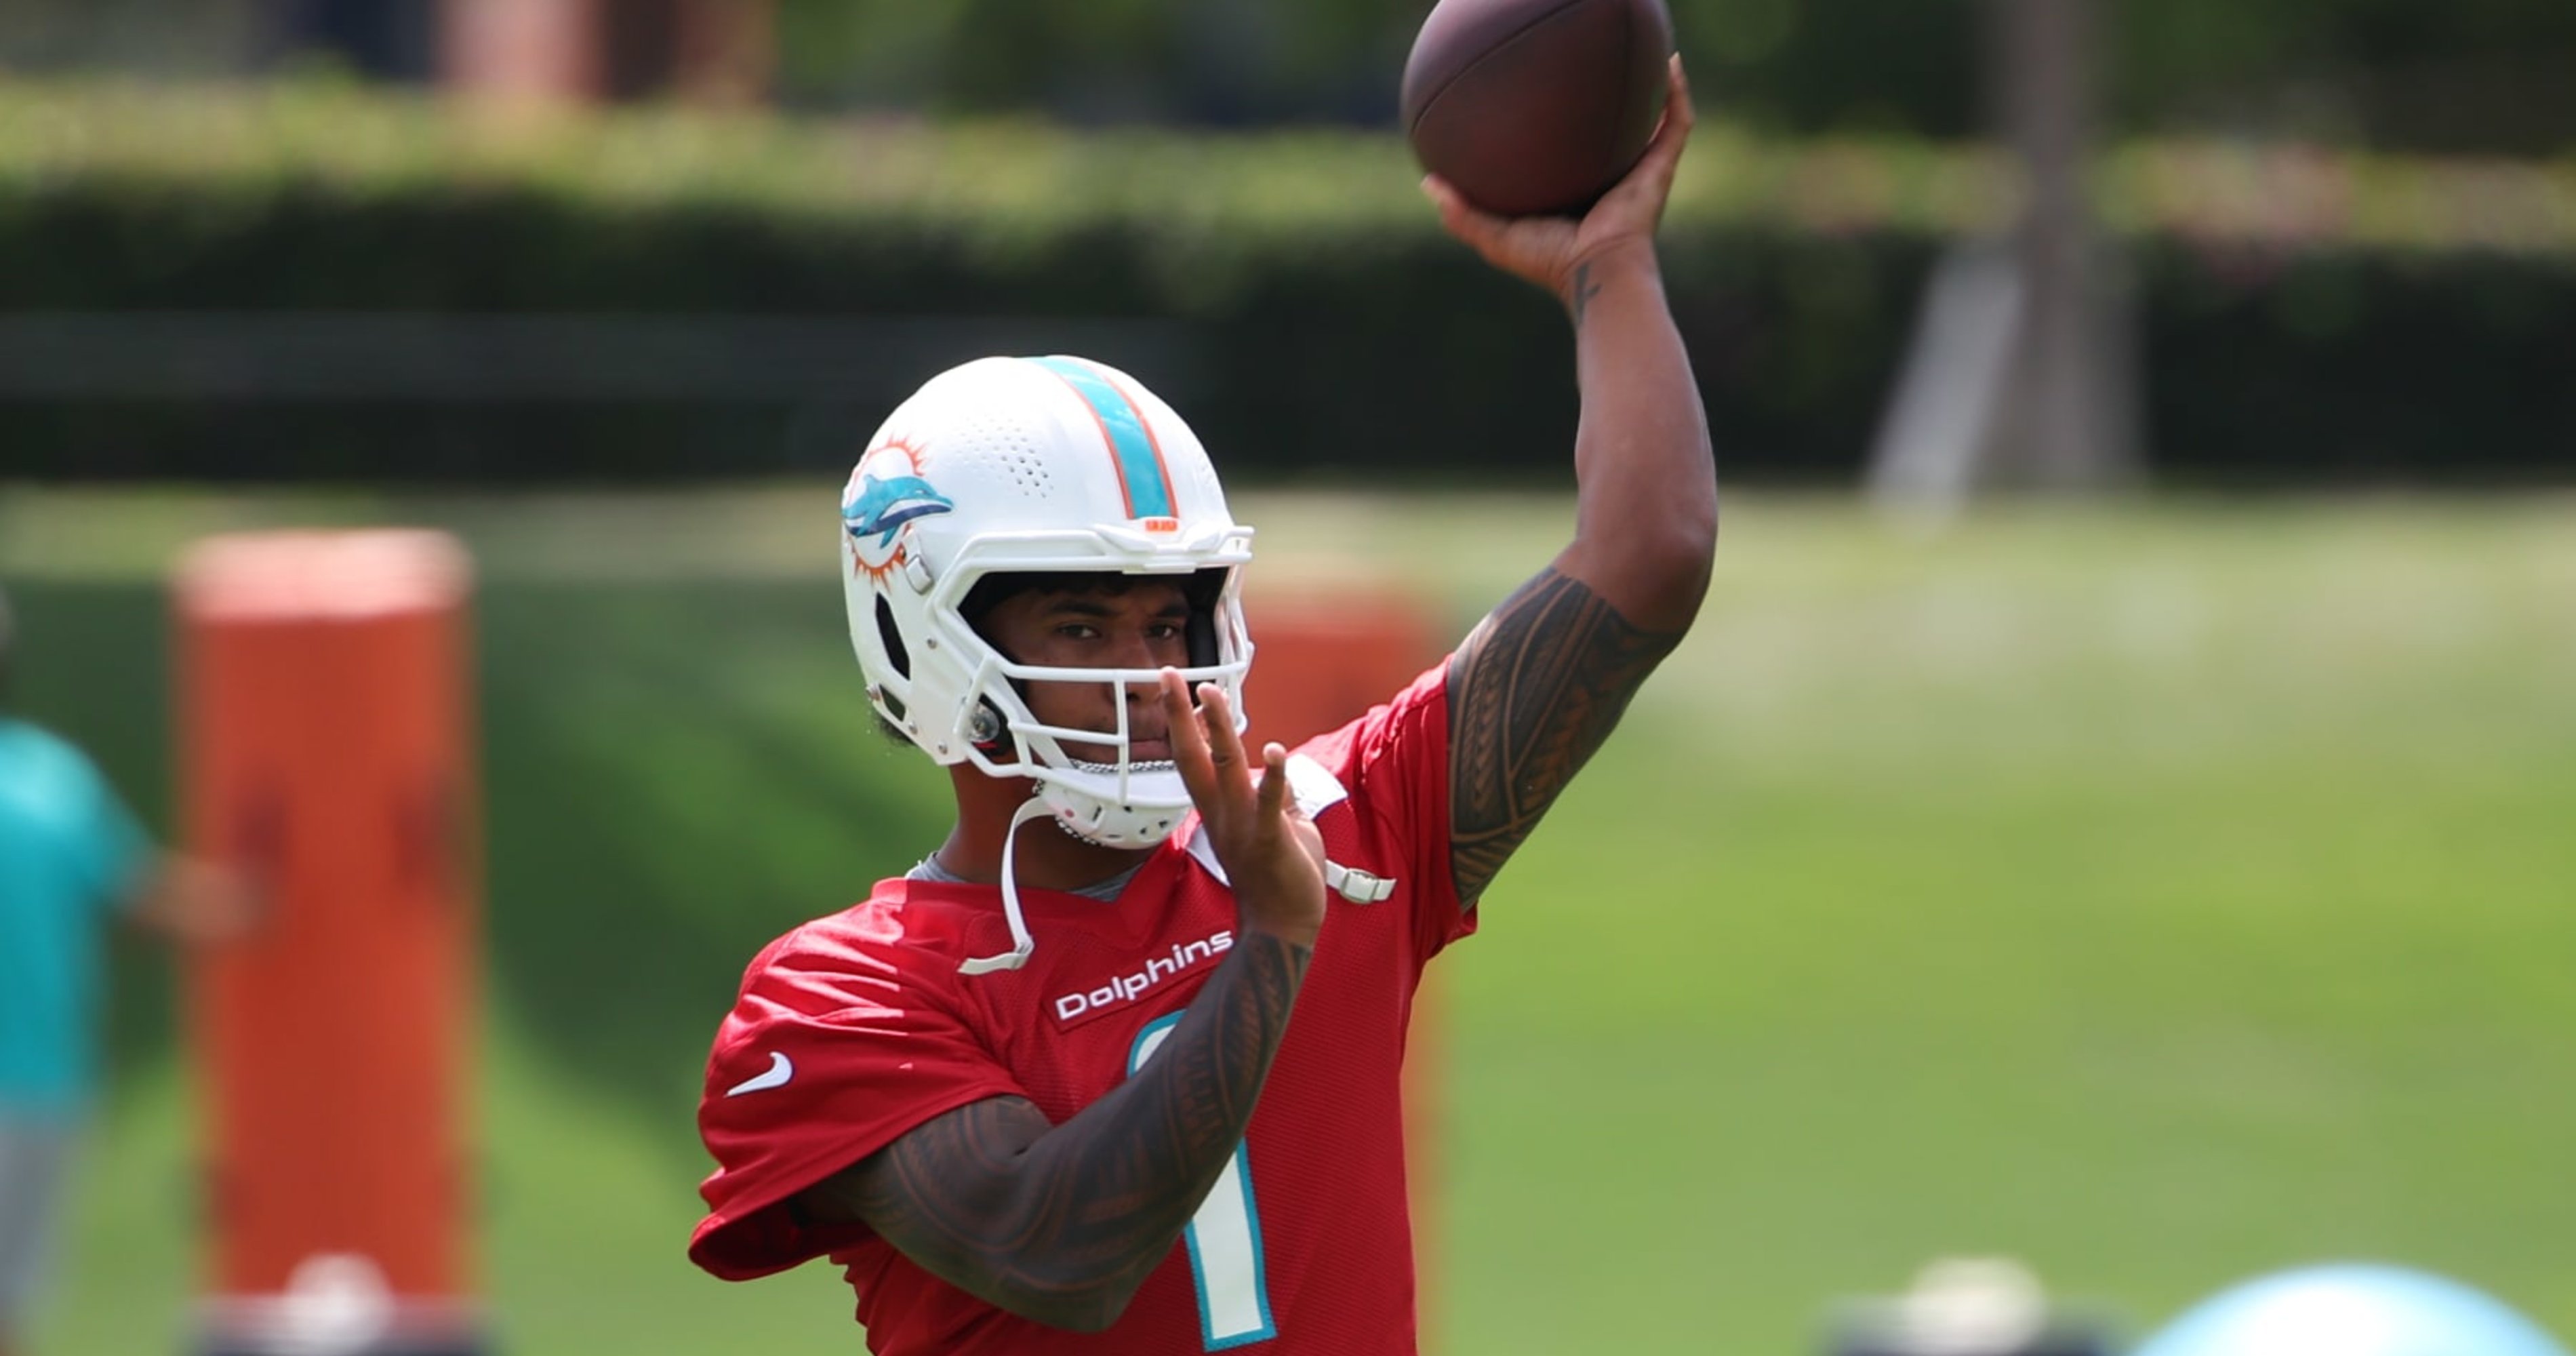 Dolphins' Updated Salary Cap After Tua Tagovailoa's Reported $212M Contract